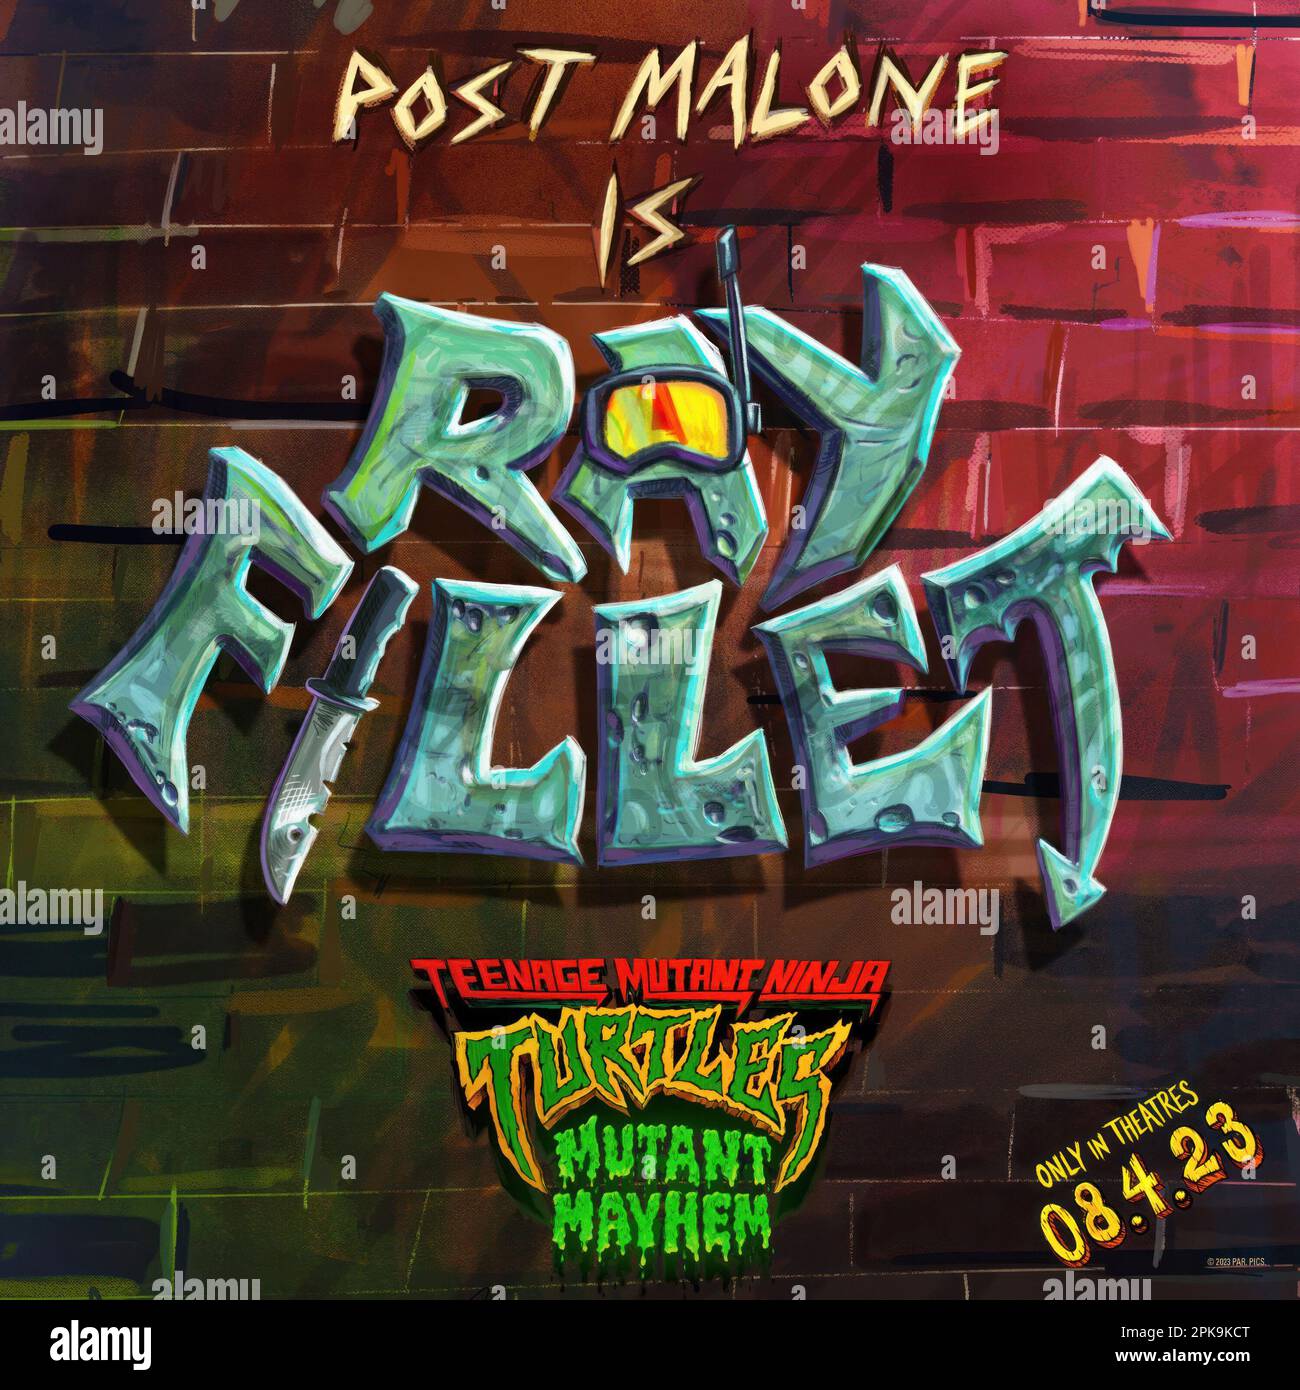 https://c8.alamy.com/comp/2PK9KCT/teenage-mutant-ninja-turtles-mutant-mayhem-advance-character-poster-post-malone-is-ray-fillet-2023-paramount-pictures-courtesy-everett-collection-2PK9KCT.jpg